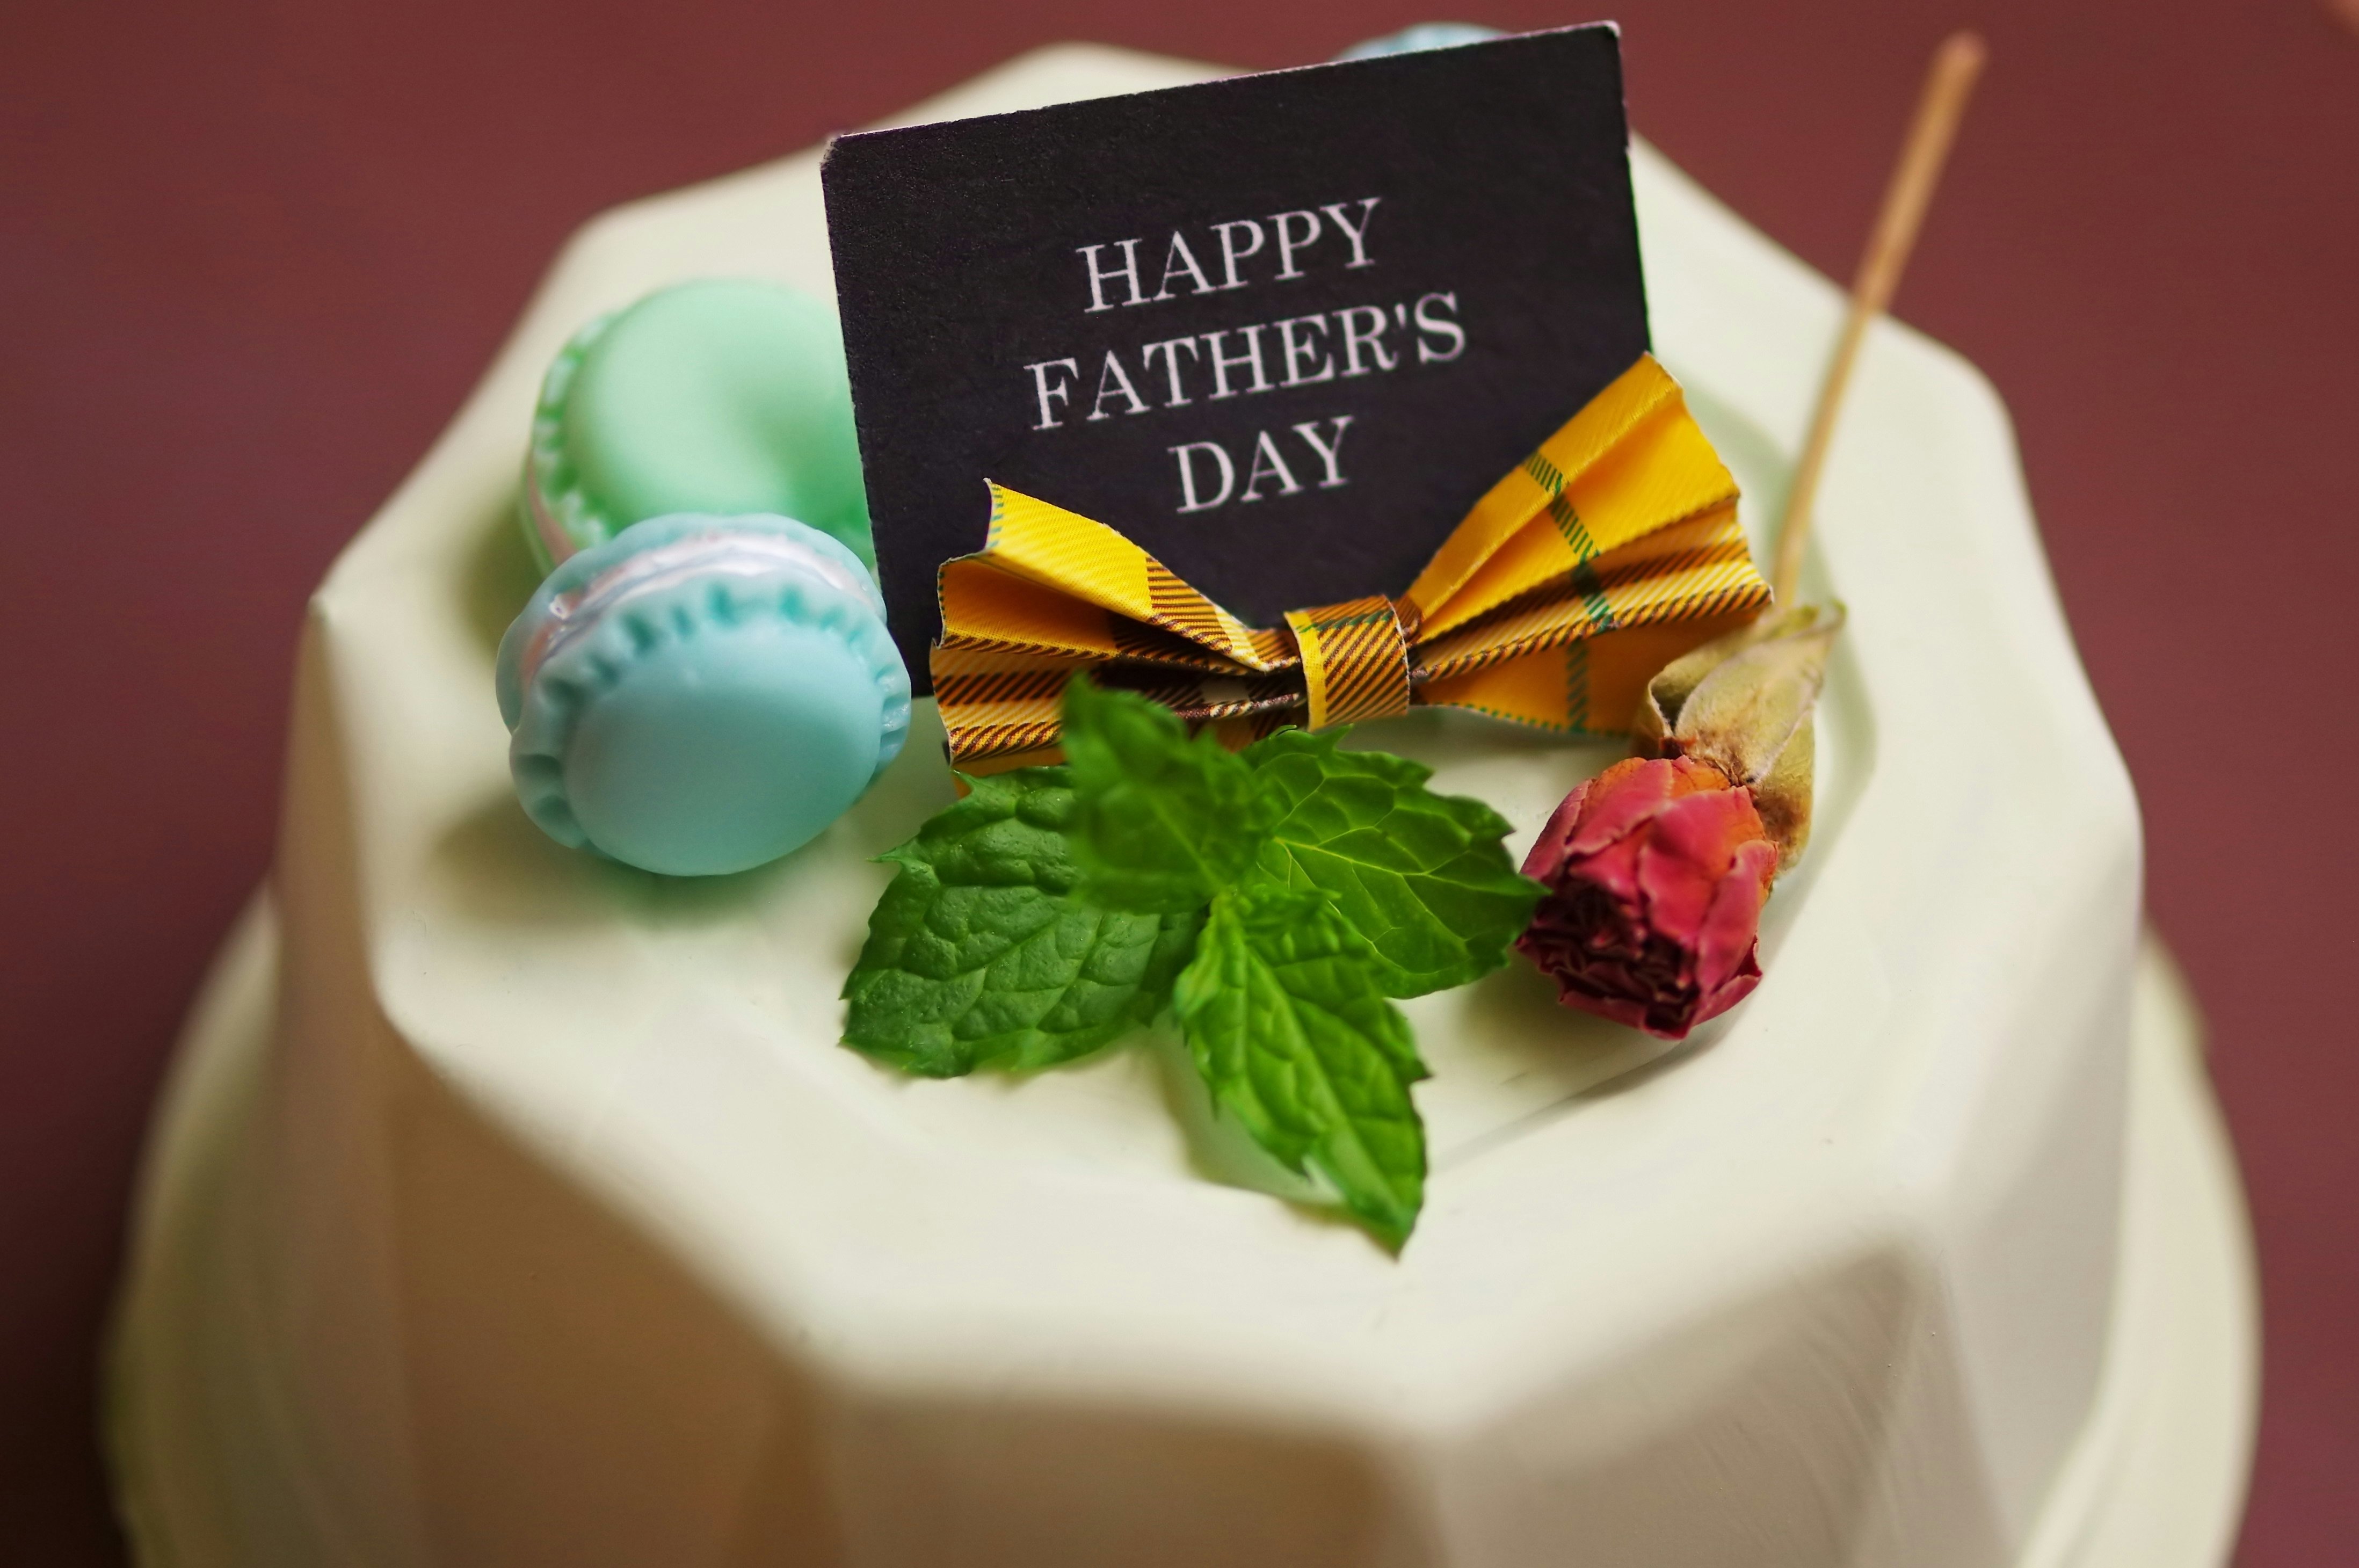 Classic Happy Father's Day Poster Cake Half Kg : Gift/Send Father's Day  Gifts Online HD1140179 |IGP.com | Happy fathers day cake, Fathers day cake,  Happy fathers day